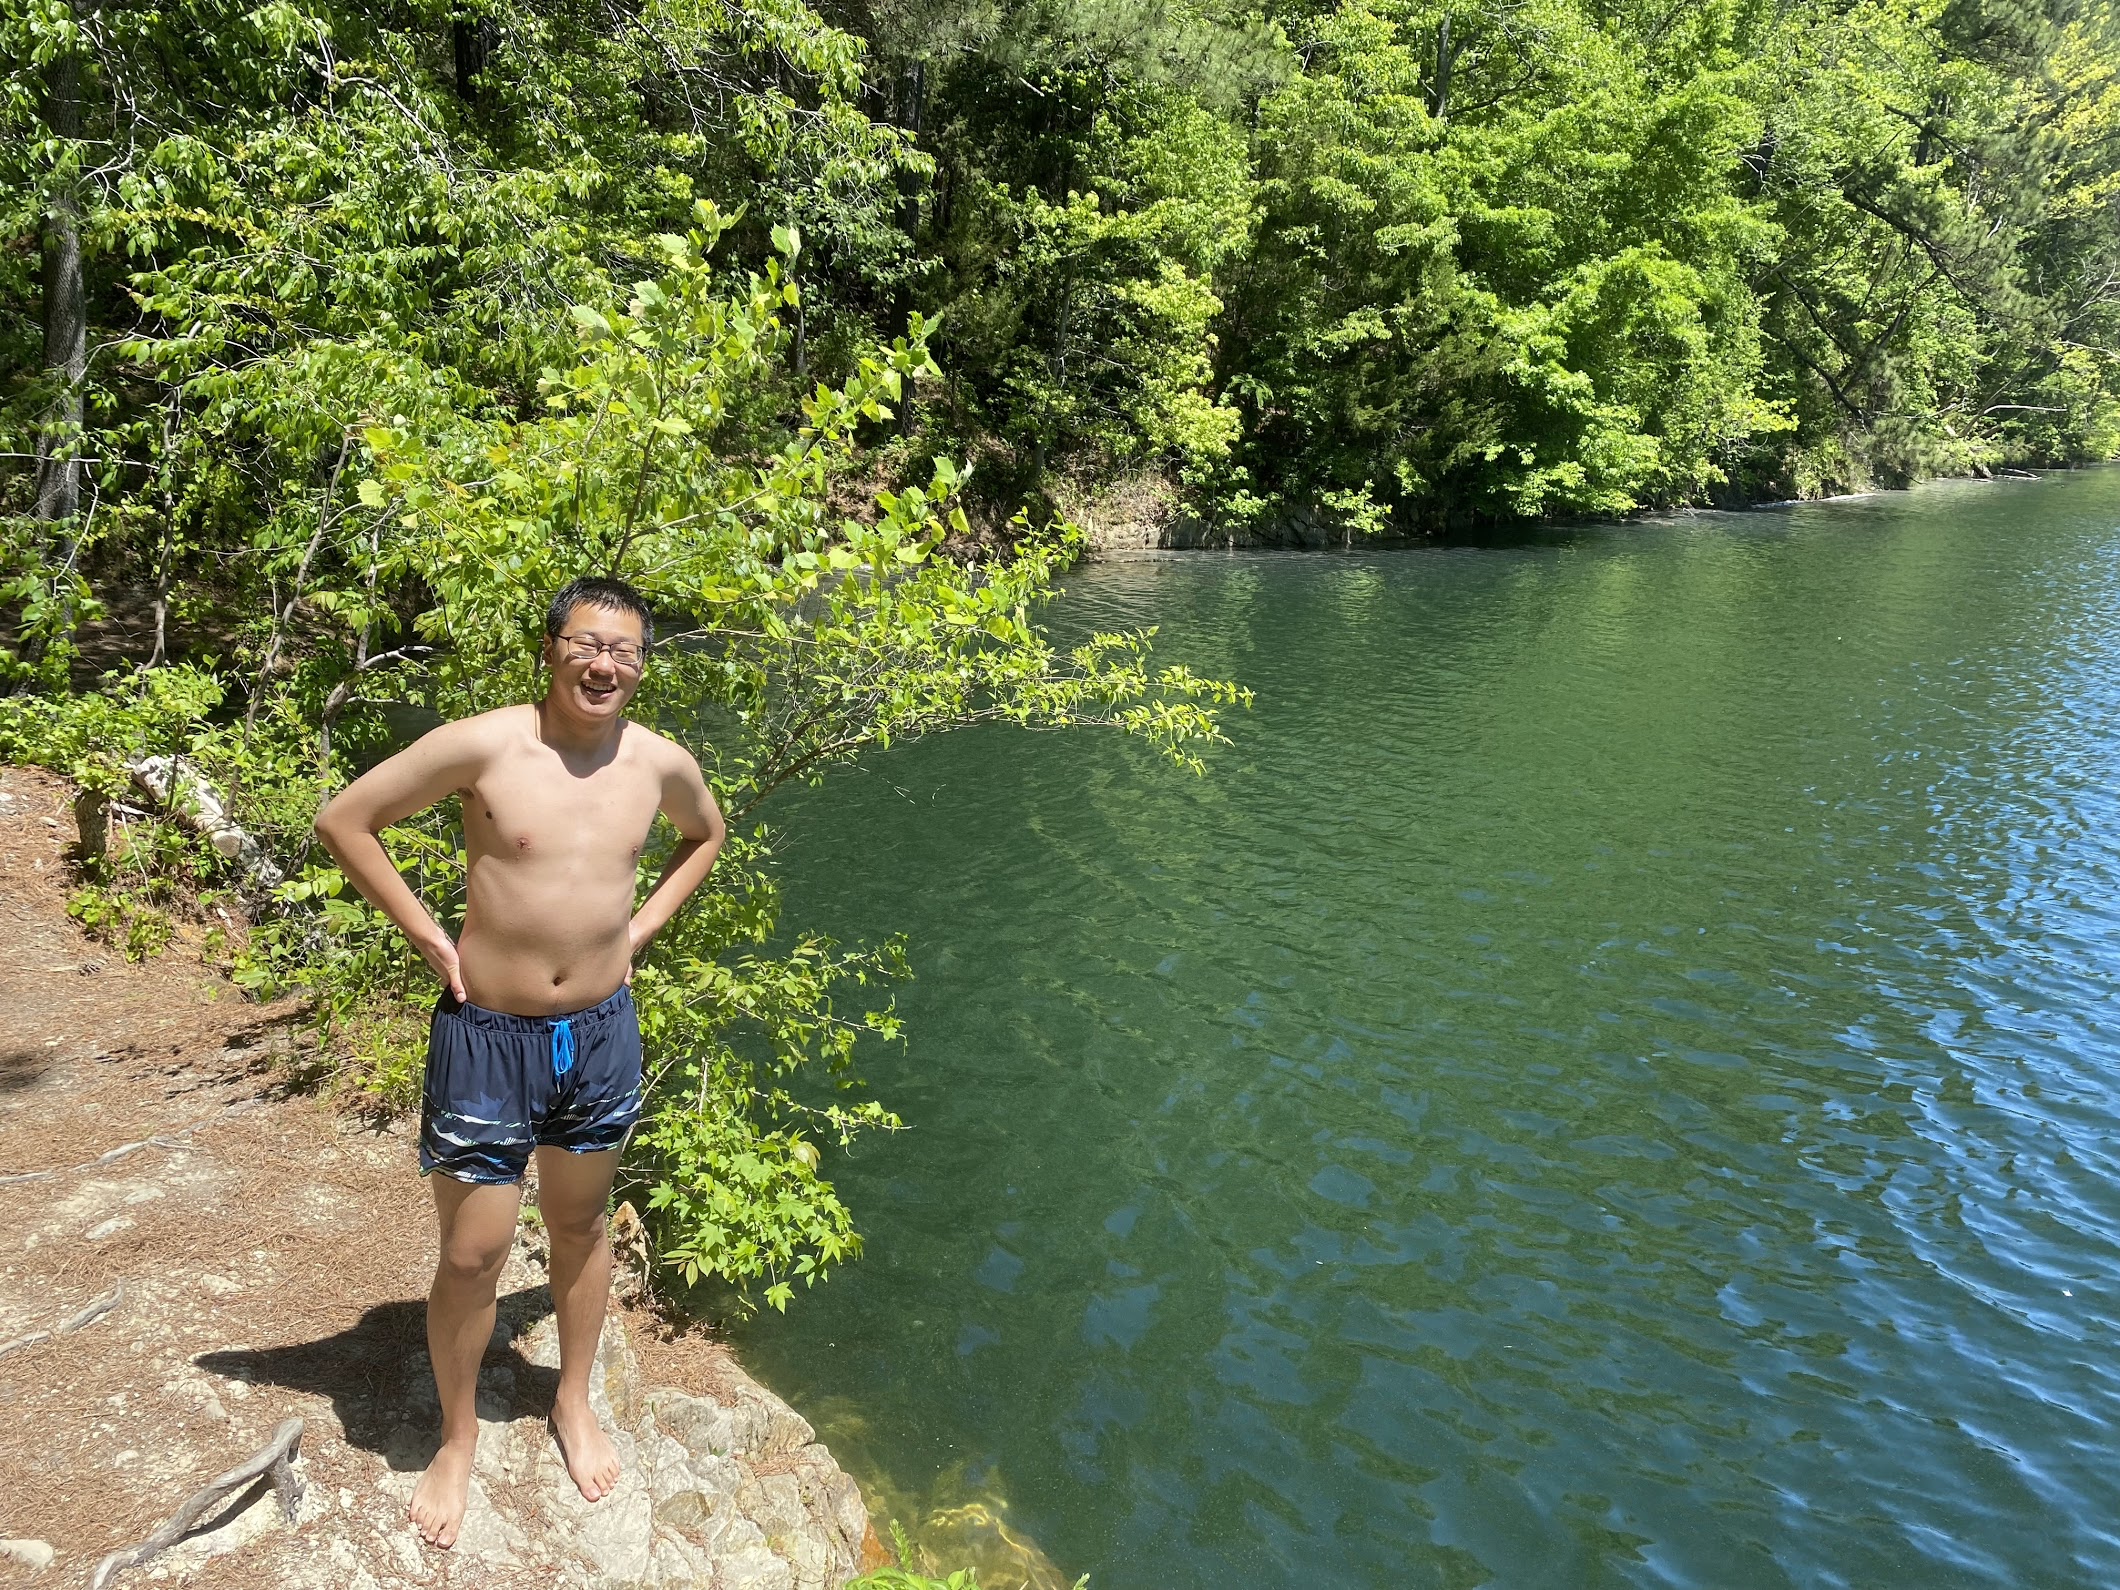 Eno River Quarry: jumping into a lake first ever in my life